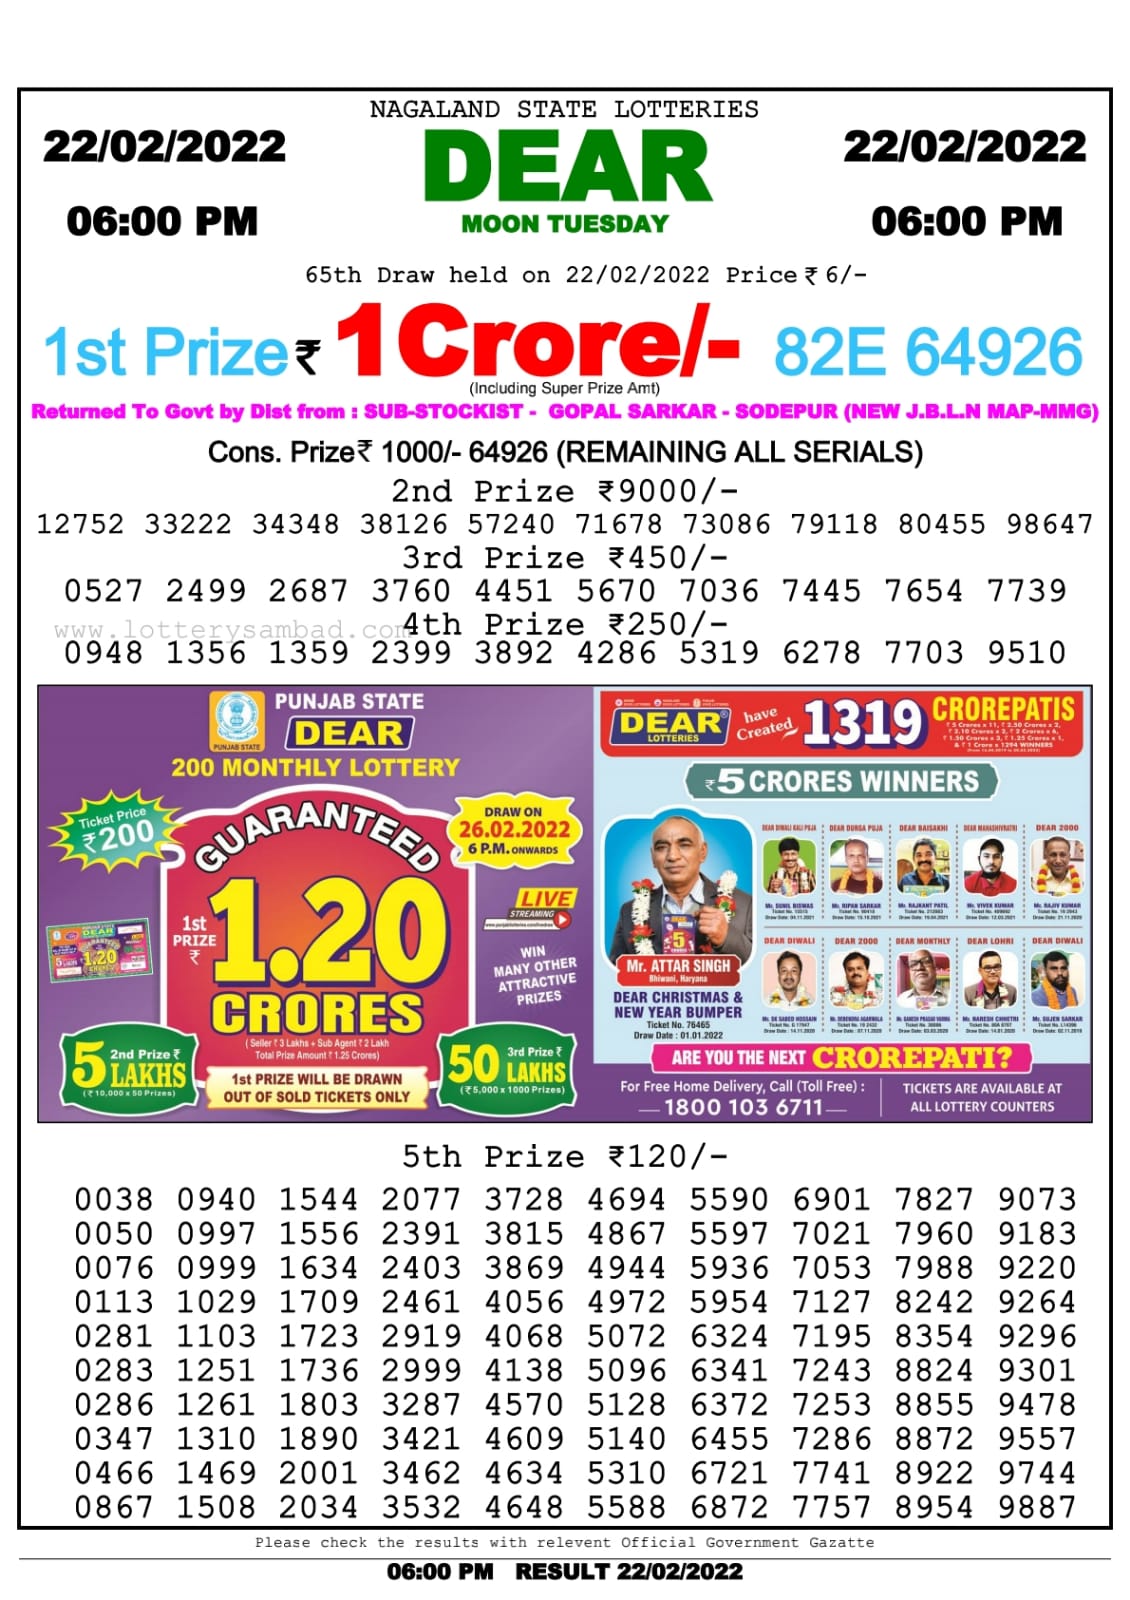 Dear Lottery Nagaland state Lottery Results 6.00 PM 22.02.2022